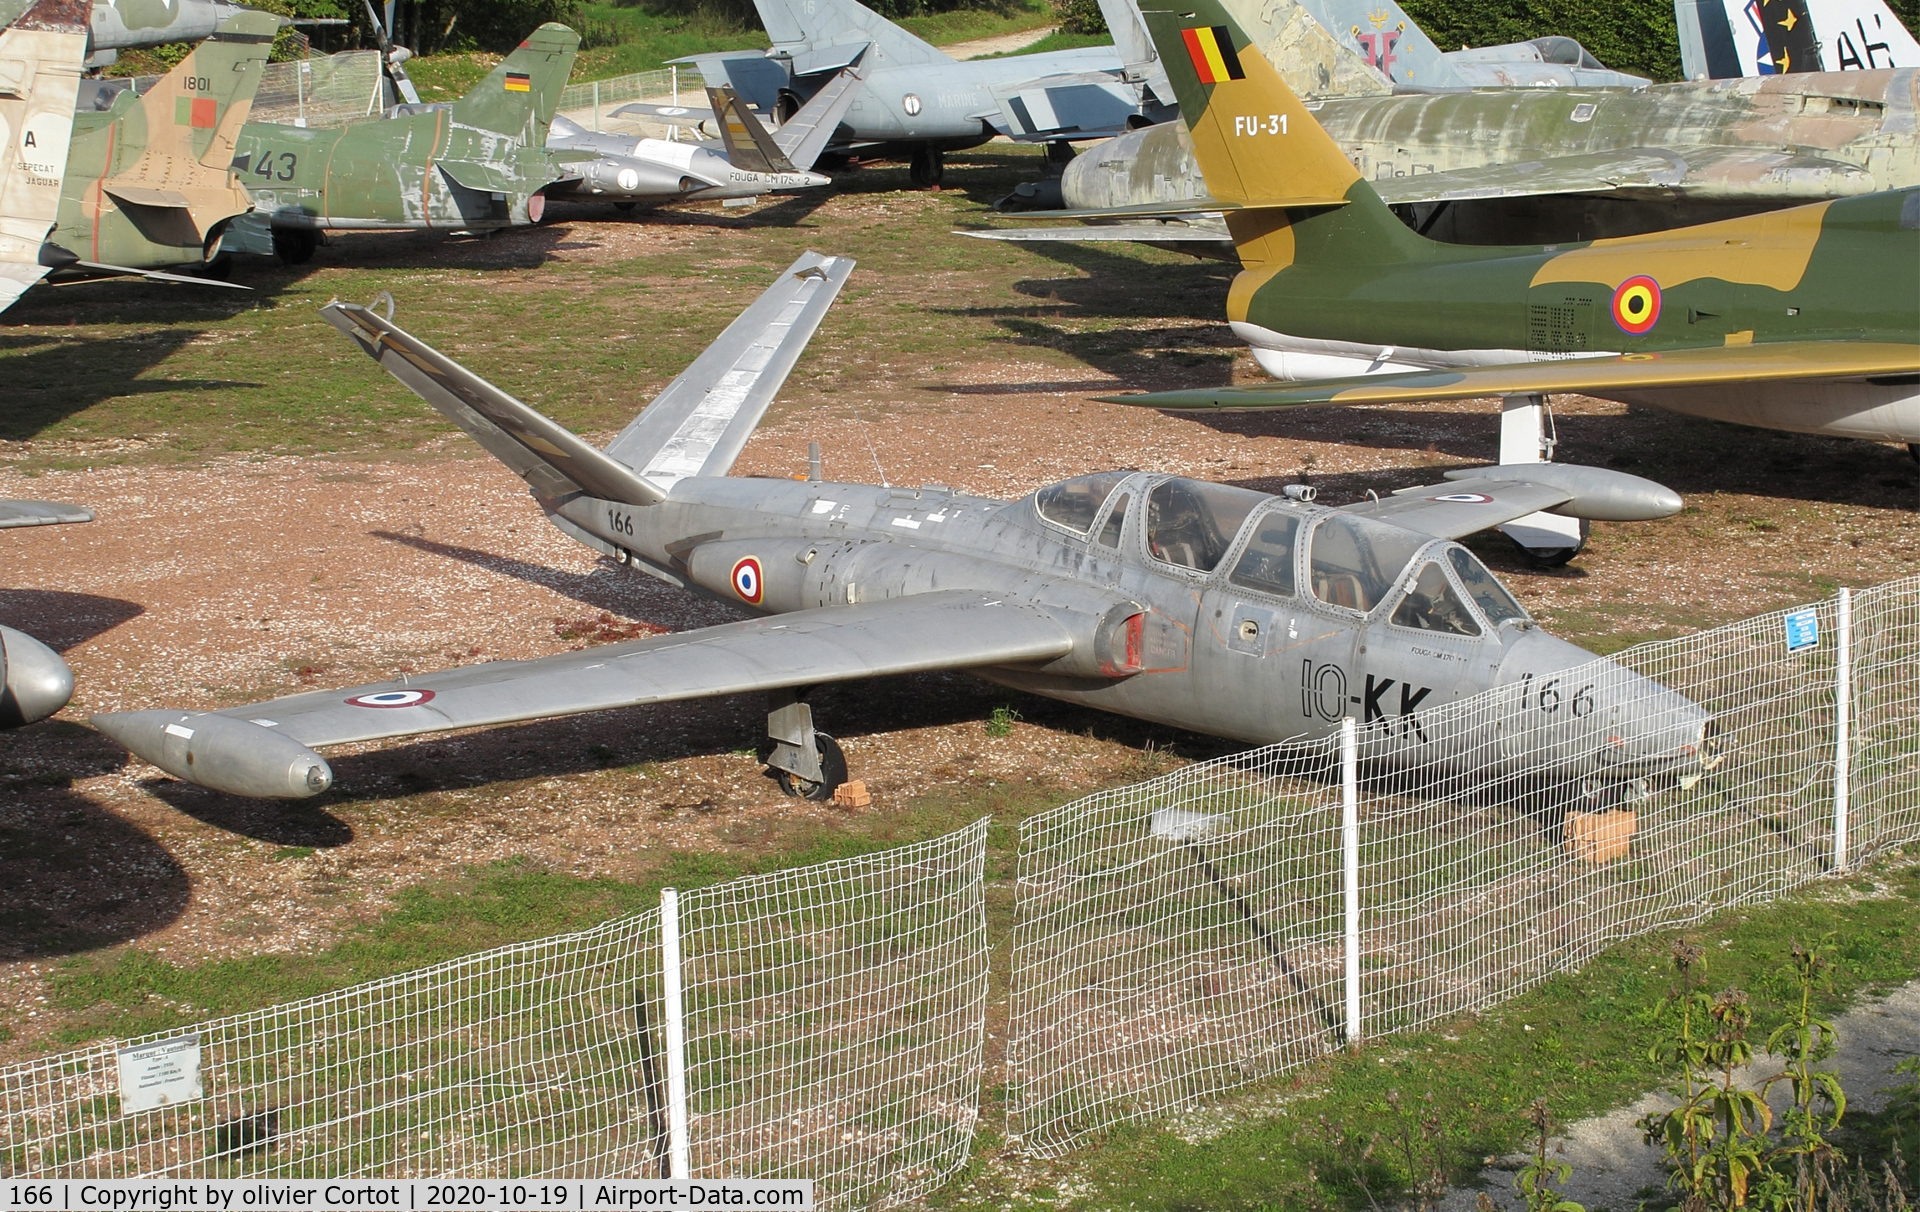 166, Fouga CM-170R Magister C/N 166, oct 2020 - note the ugly paint job on the F-84...